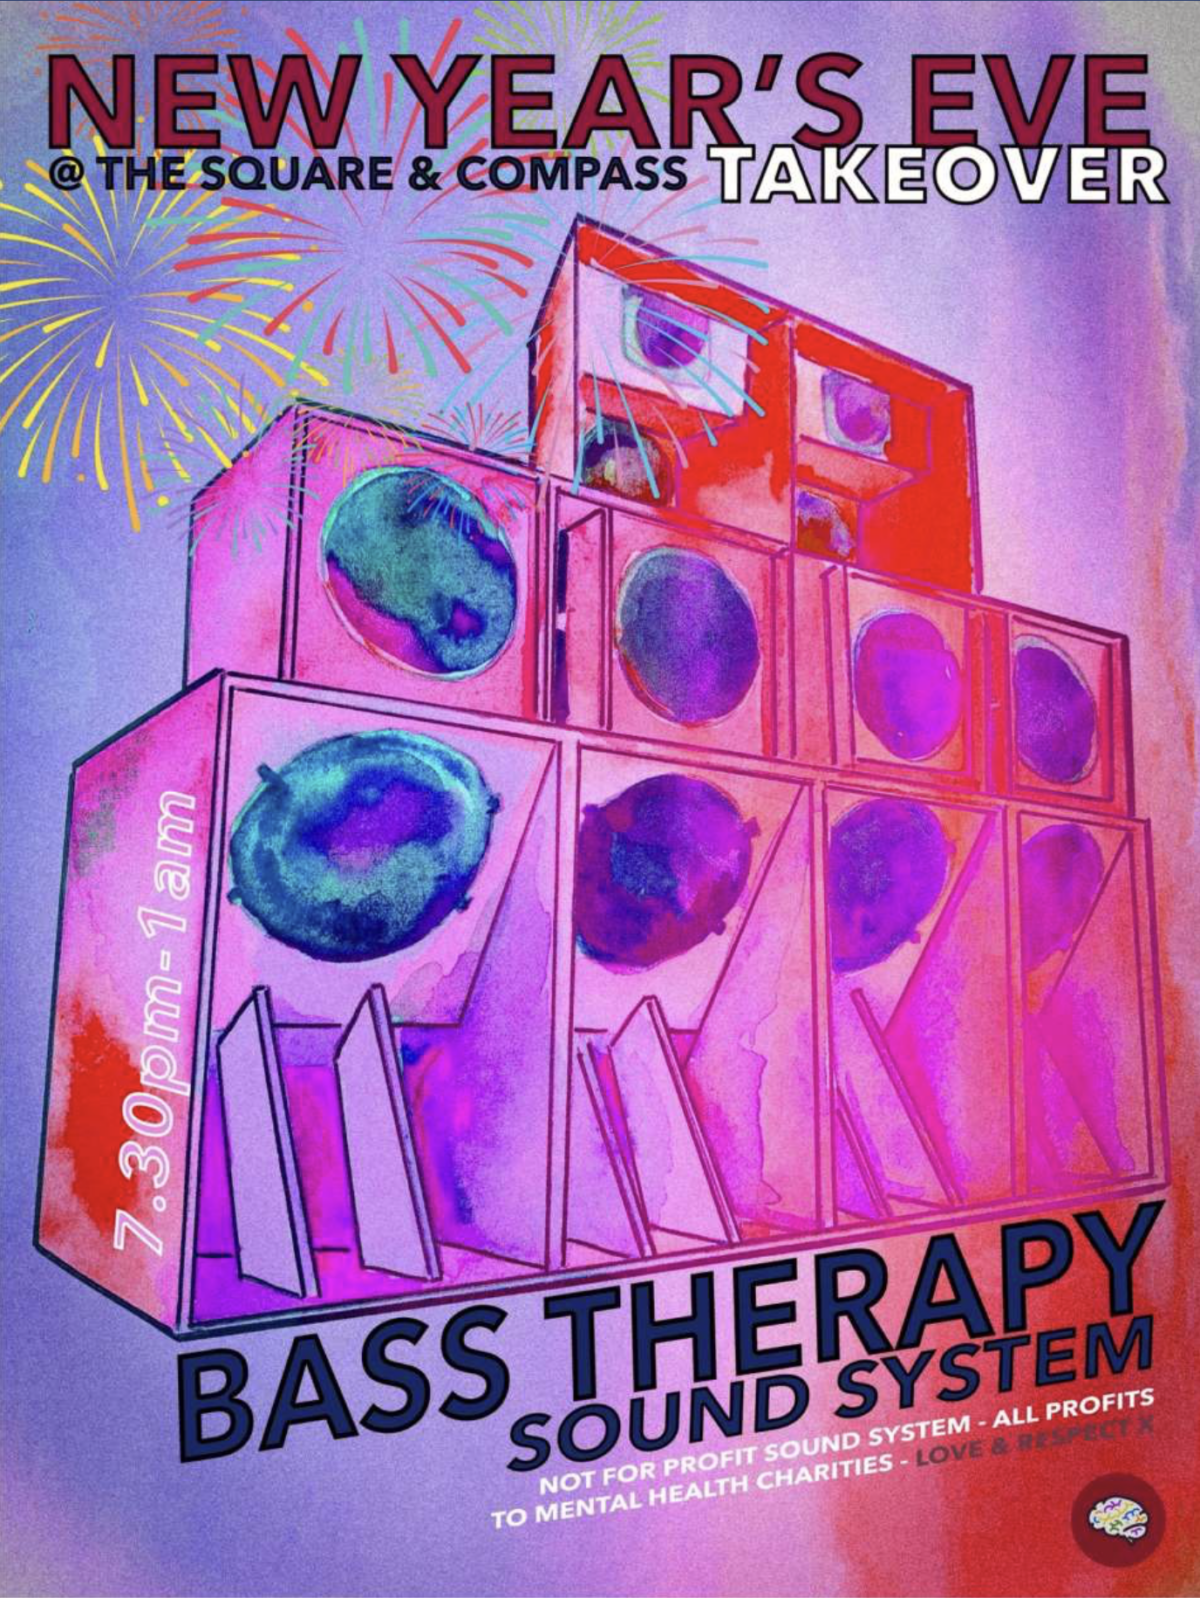 Bass Therapy Sound System Square & Compass Takeover flyer